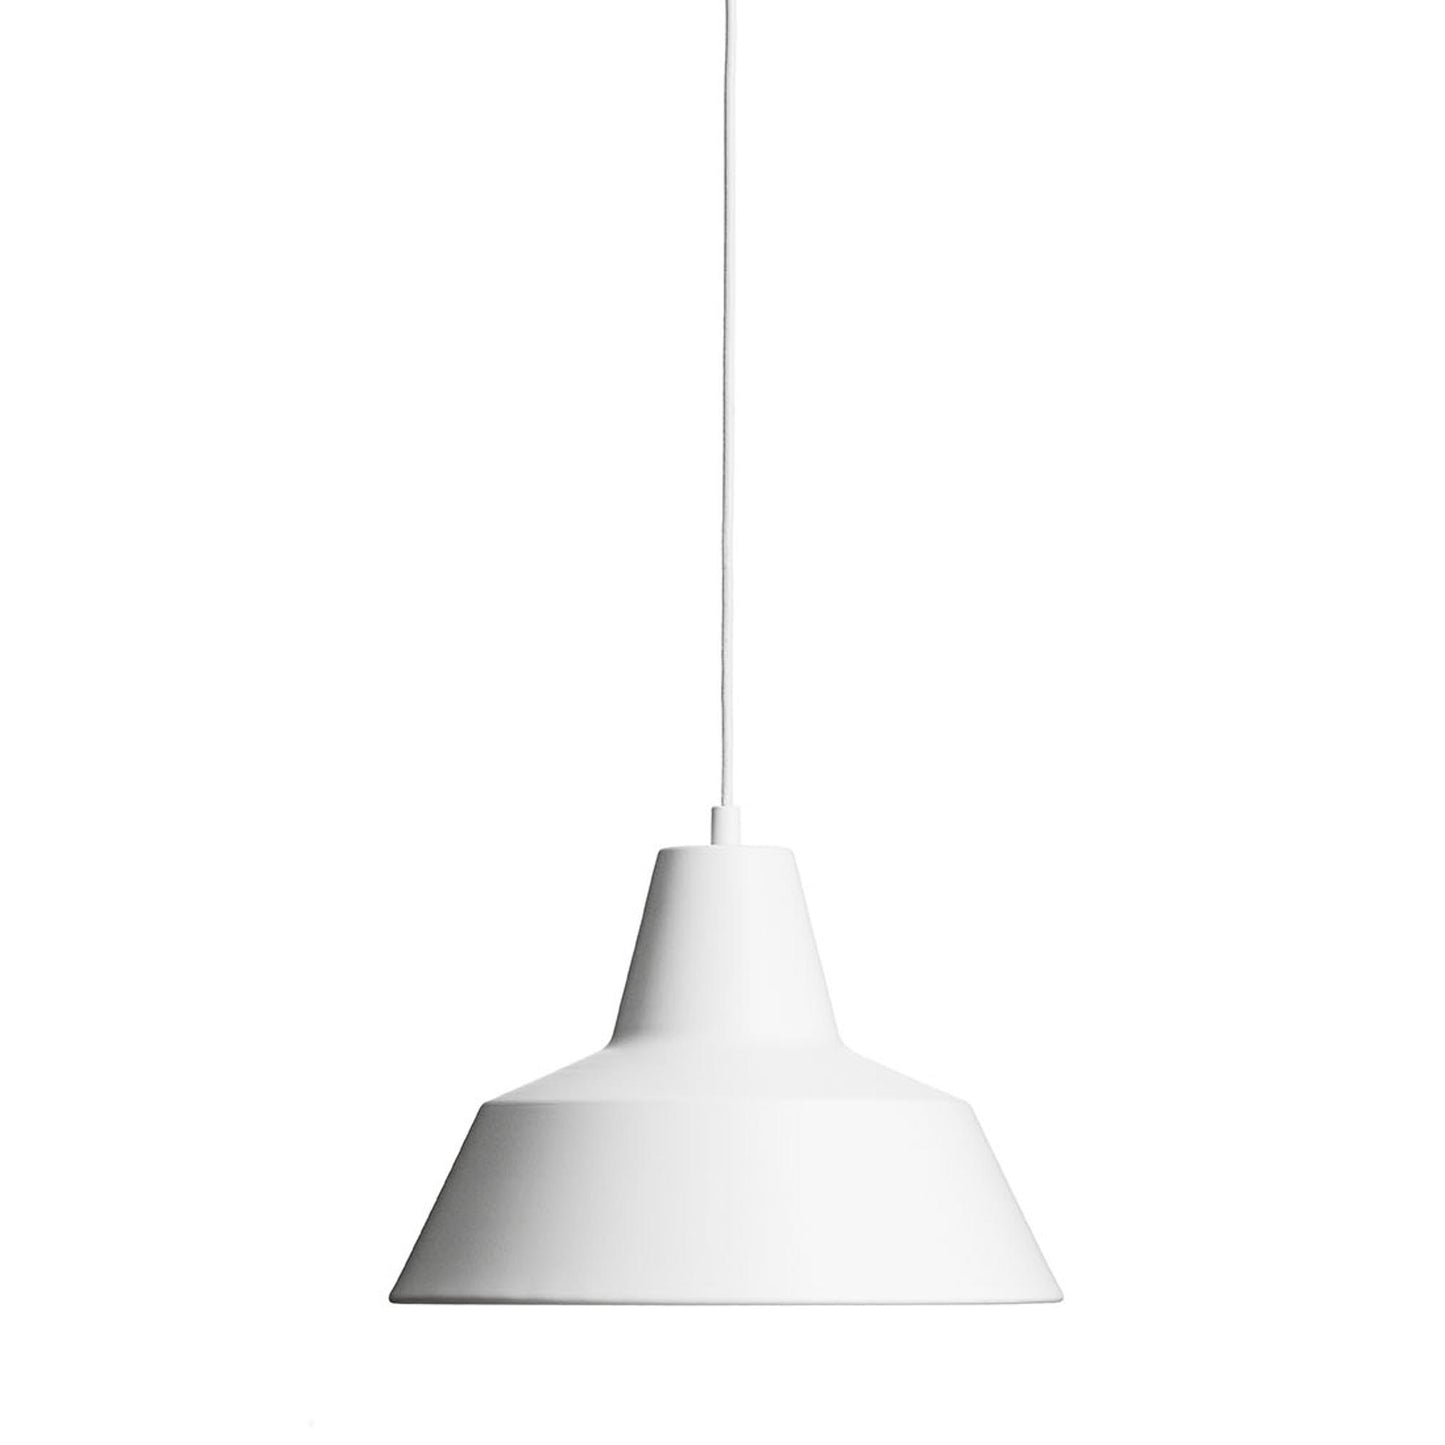 Workshop Lamp Pendant Lamp W3 by Made By Hand #Mat White